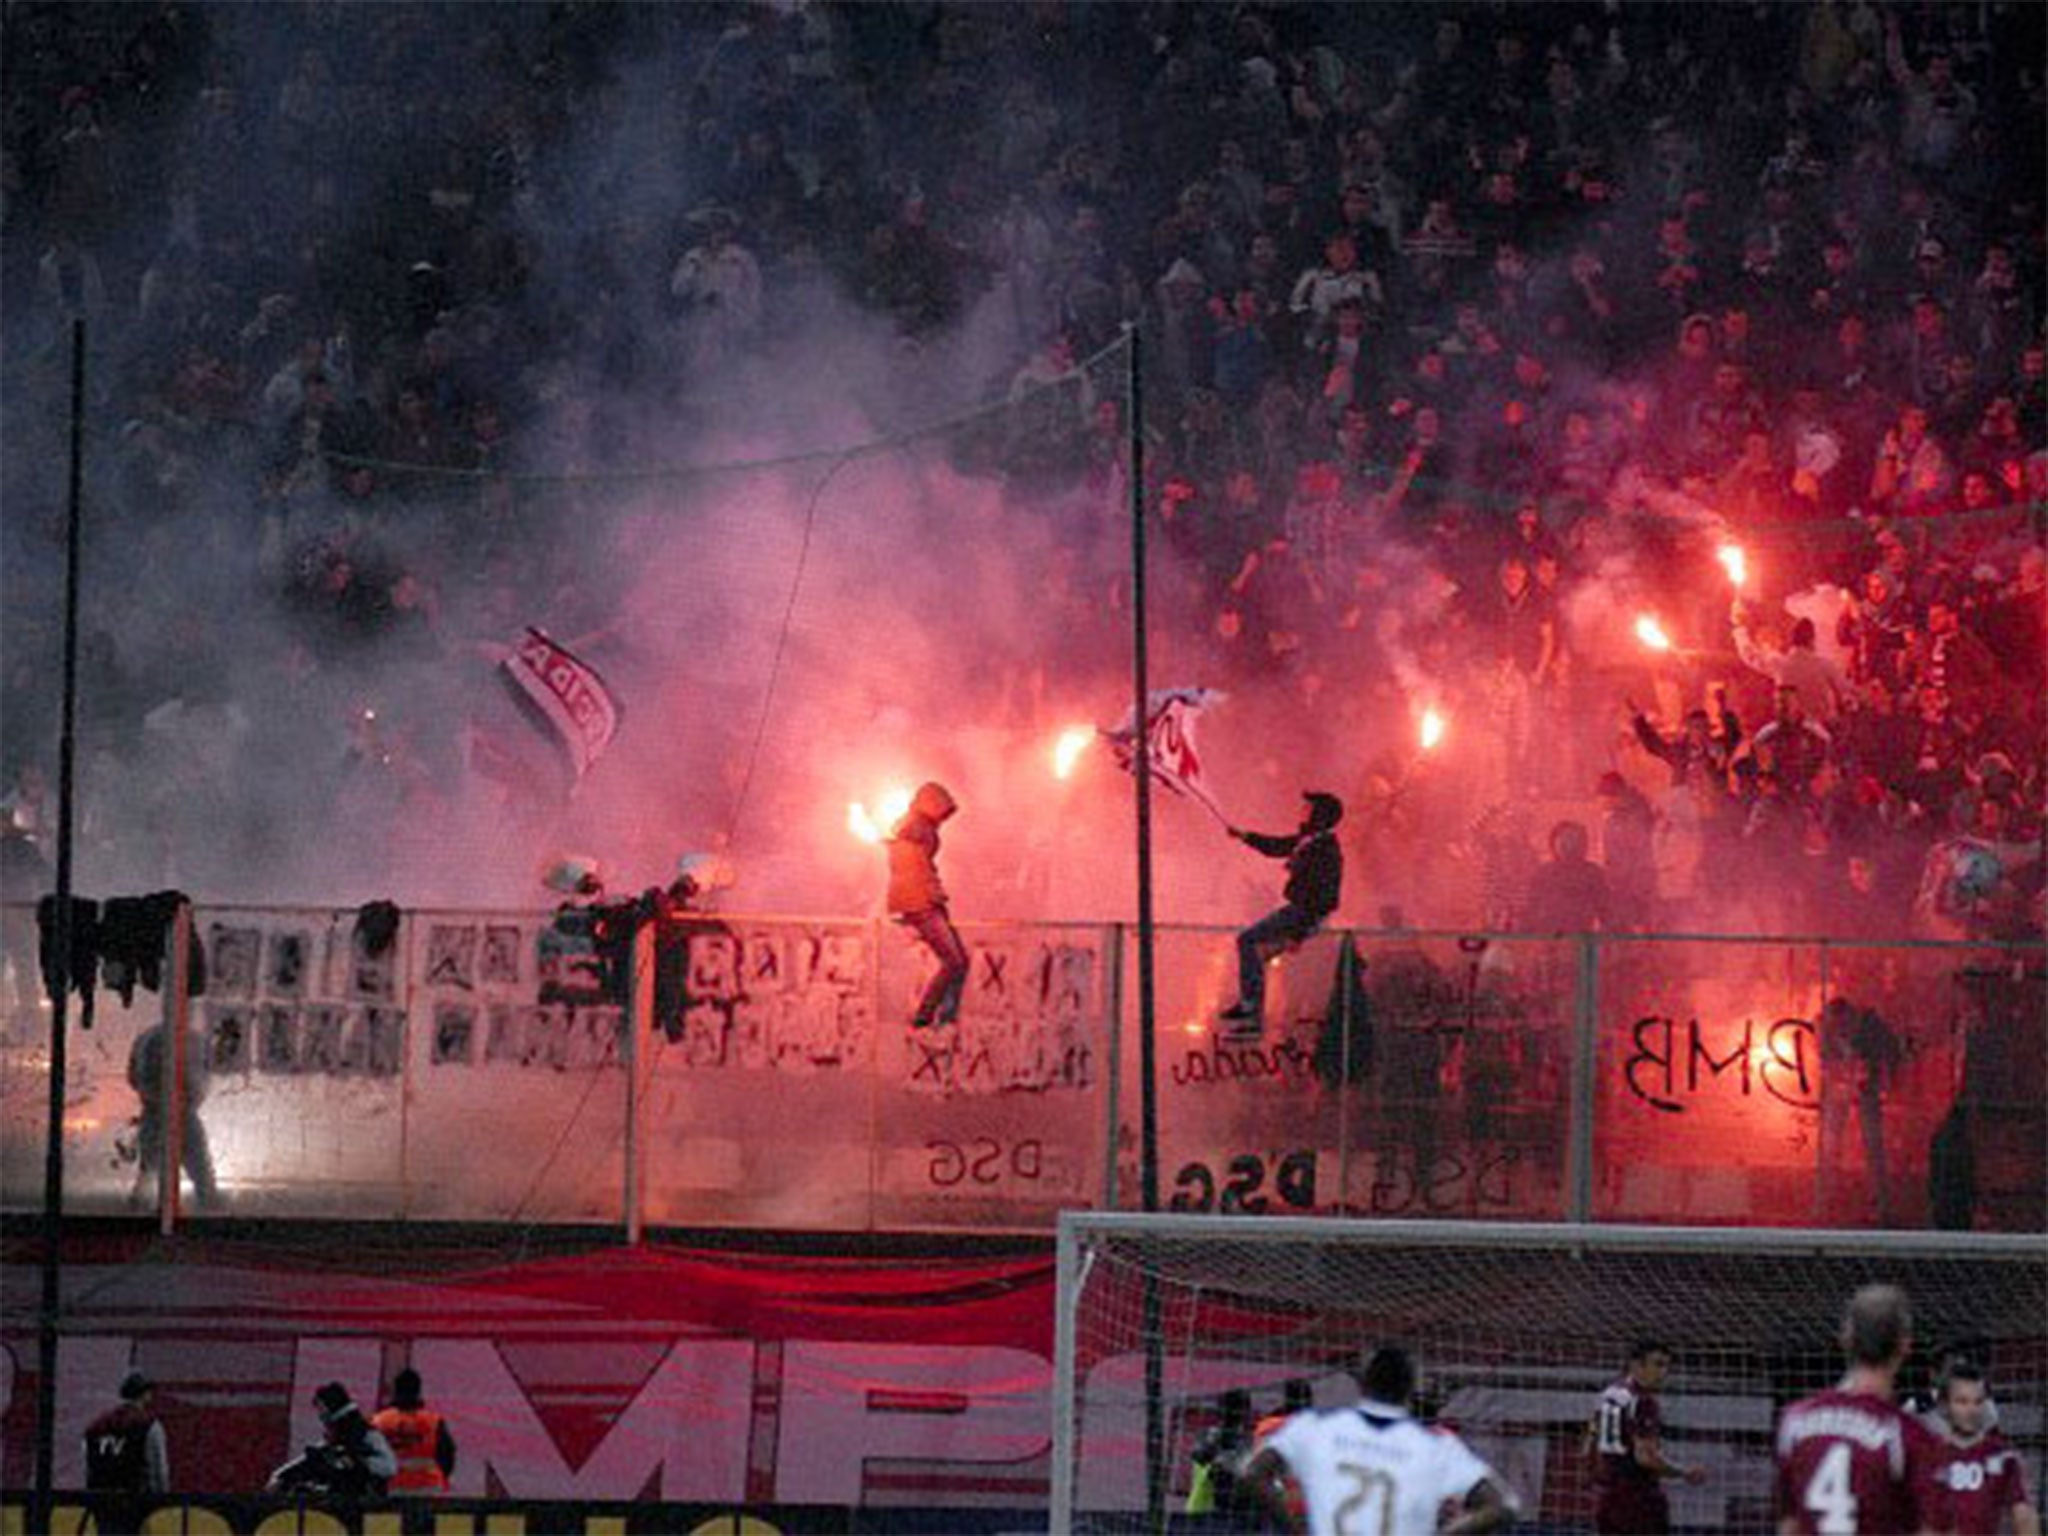 Rapid Bucharest fans with flares pictured on the terraces during a match with Astra Giurgiu in 2012